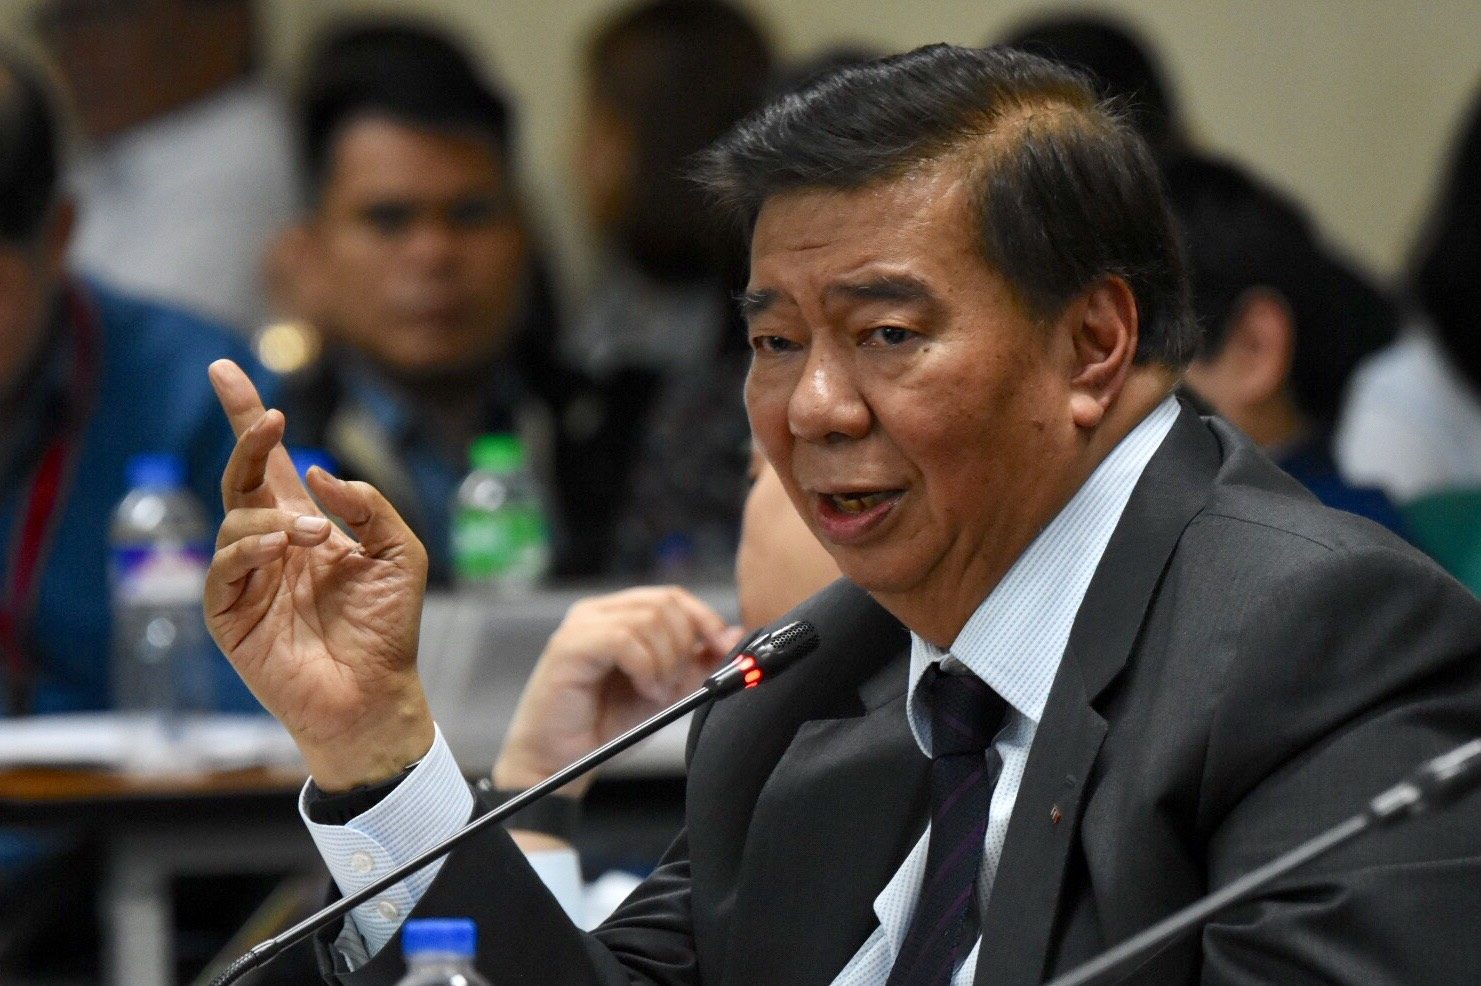 Drilon: Build youth centers first before lowering age of criminal responsibility